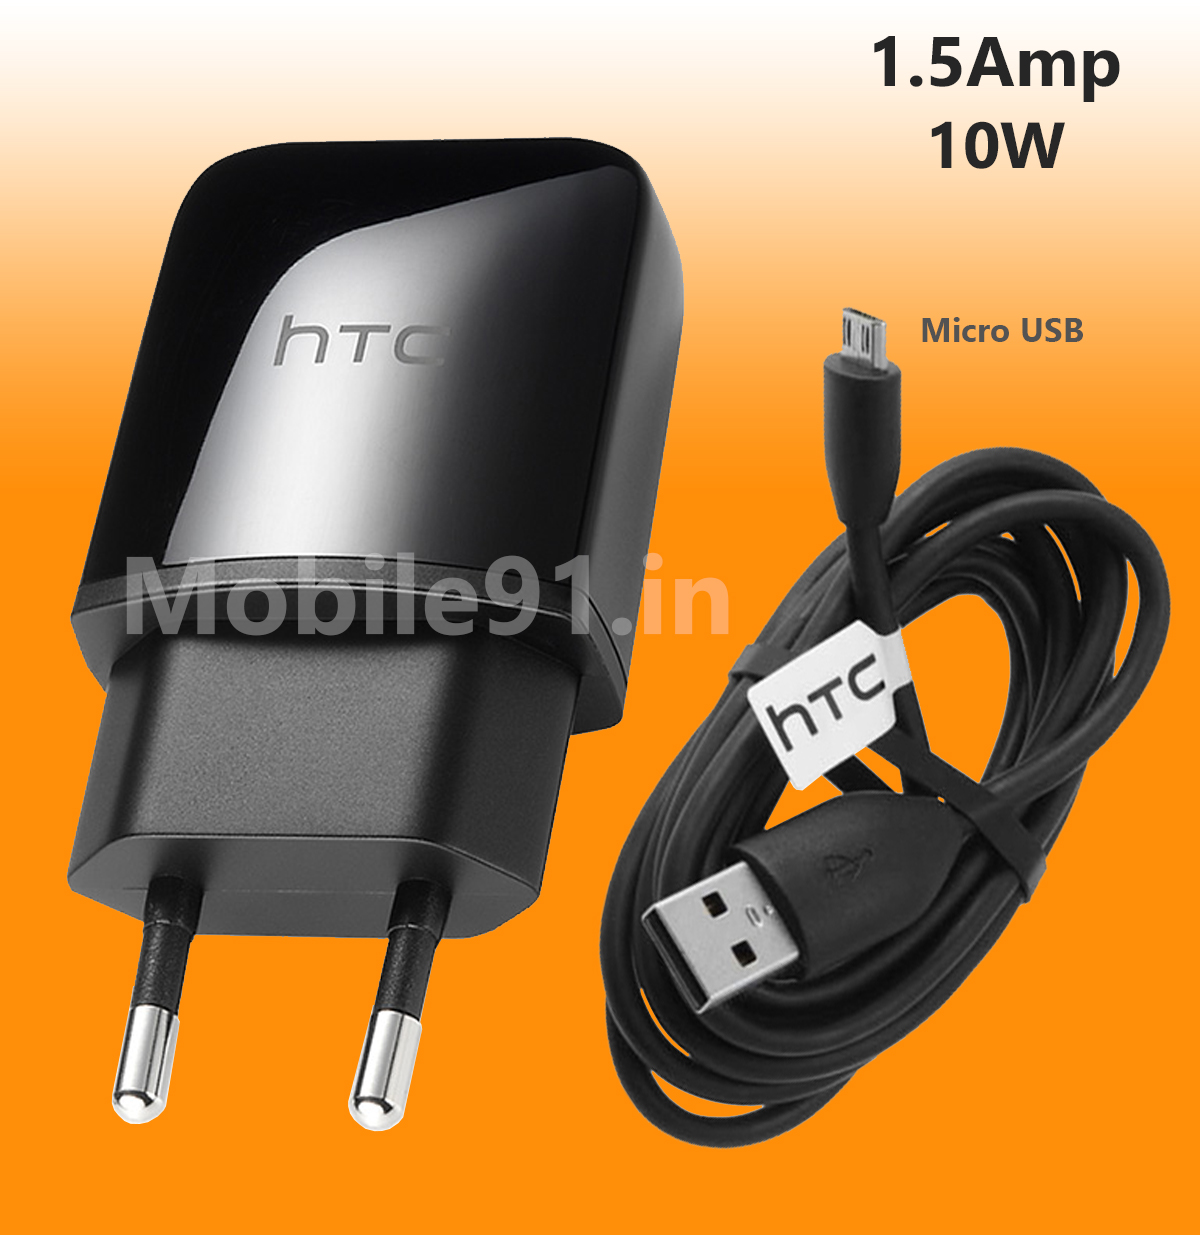 Afscheid Kameel Portiek HTC 1.5 Amp Charger with Micro USB Cable for HTC Mobile Phone - Mobile 91.in